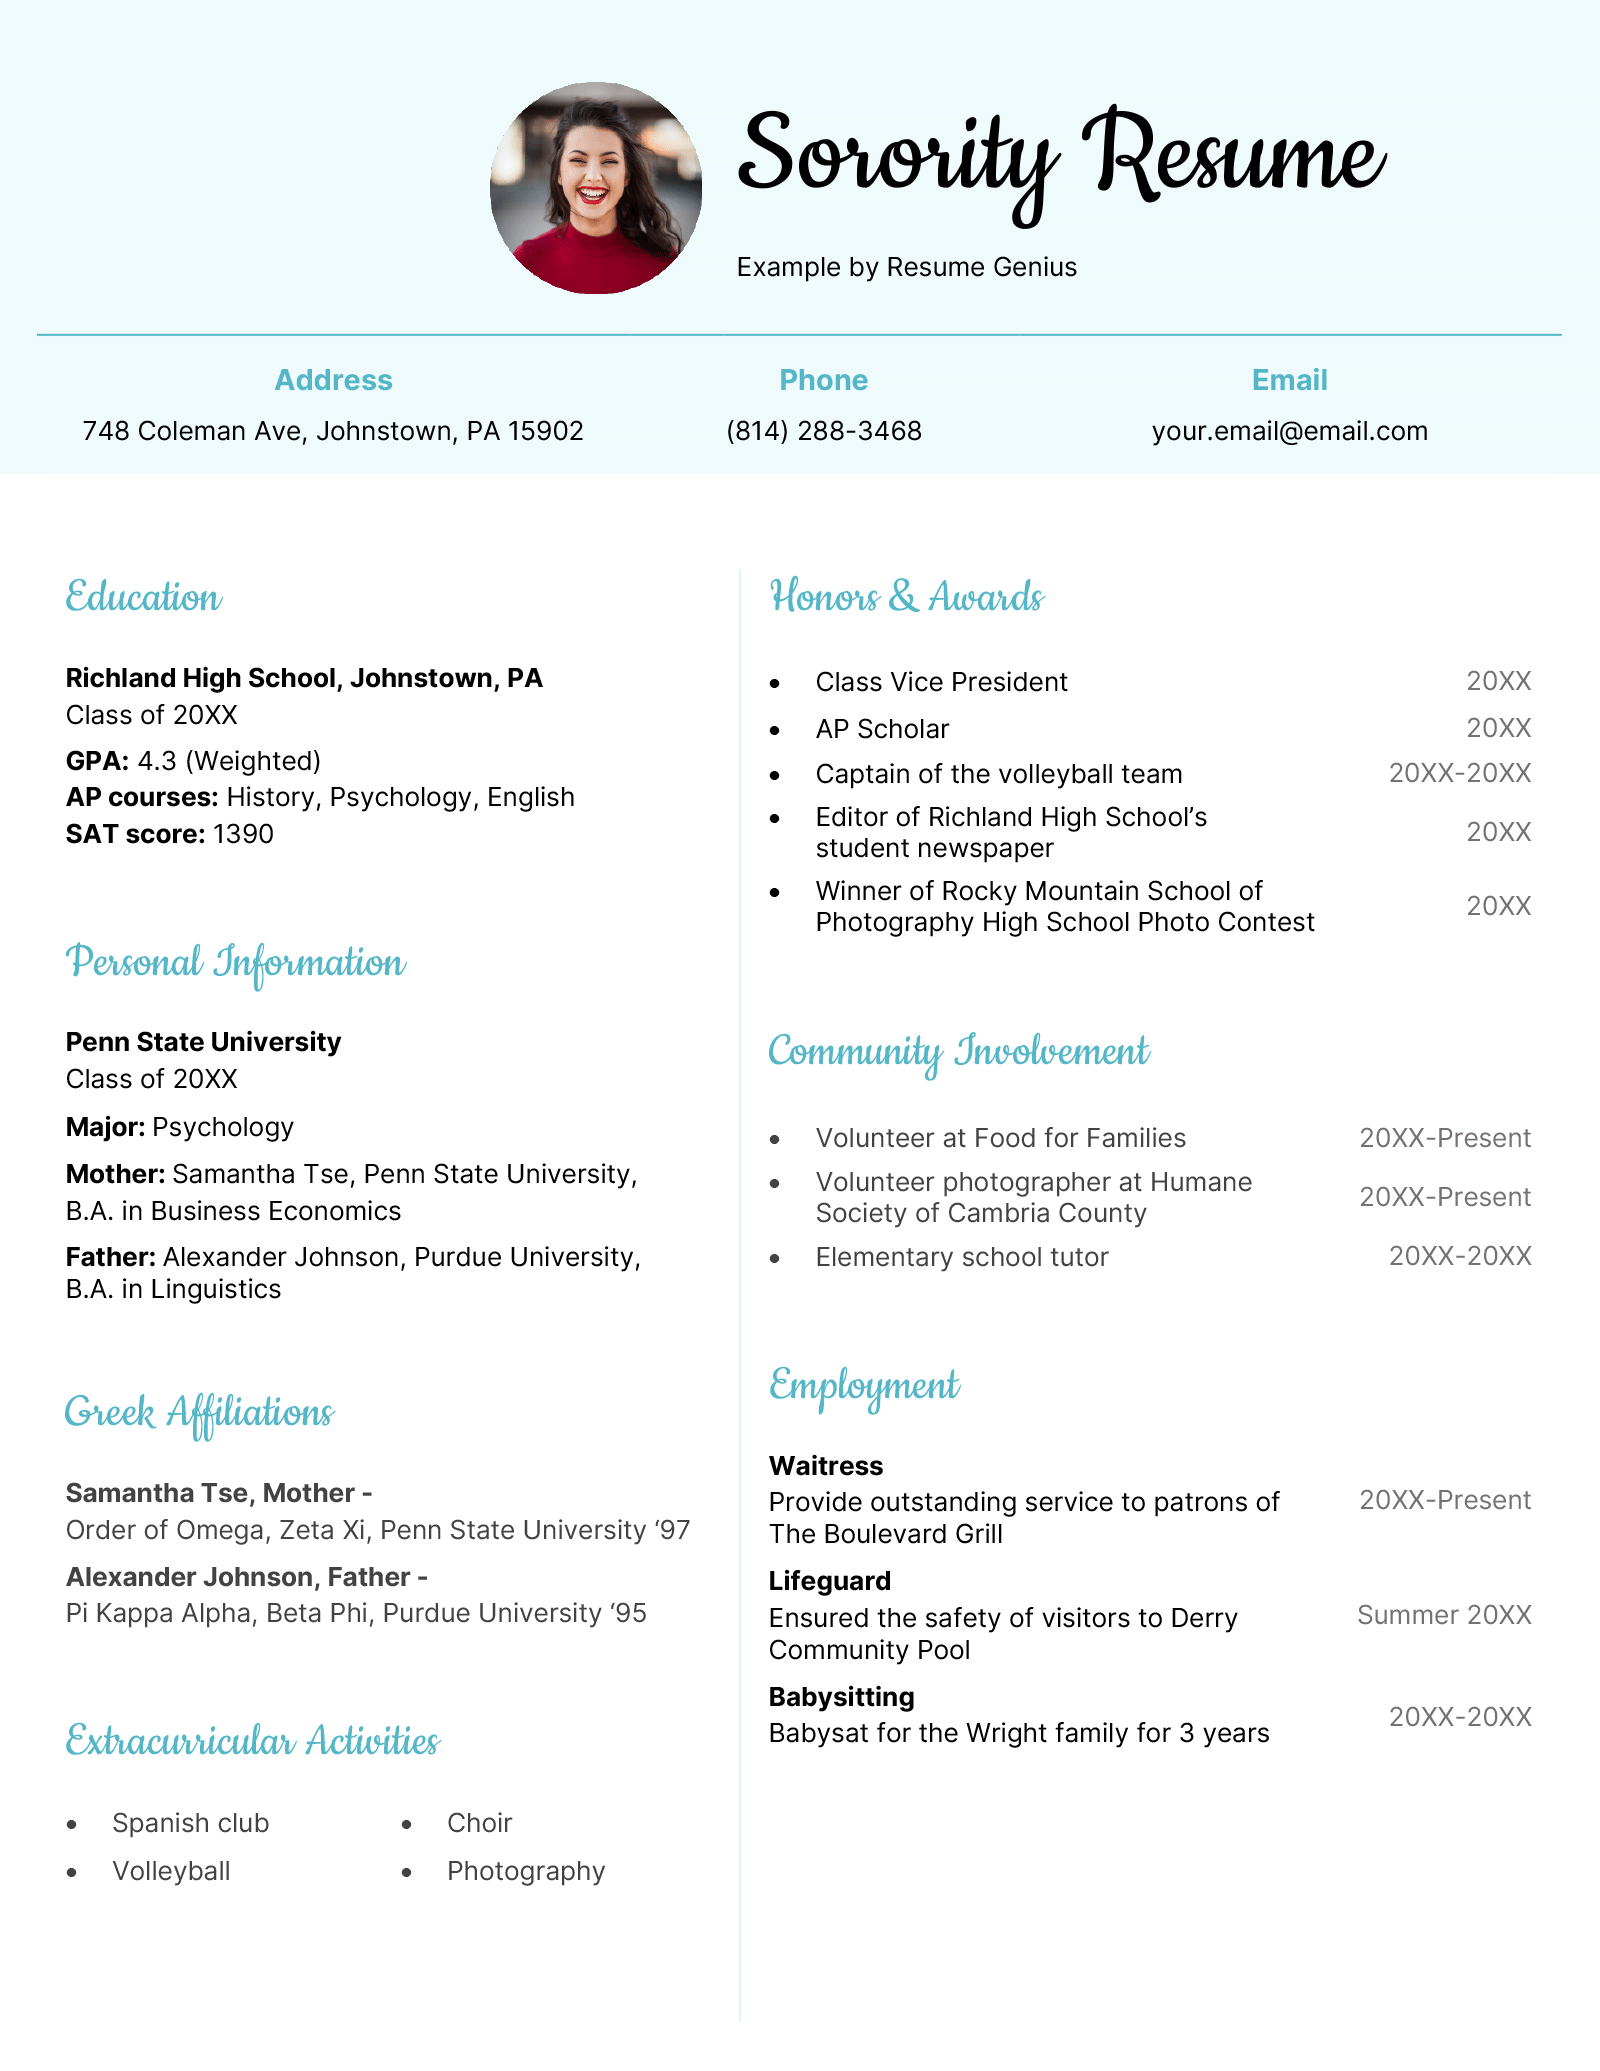 An example of a sorority resume.